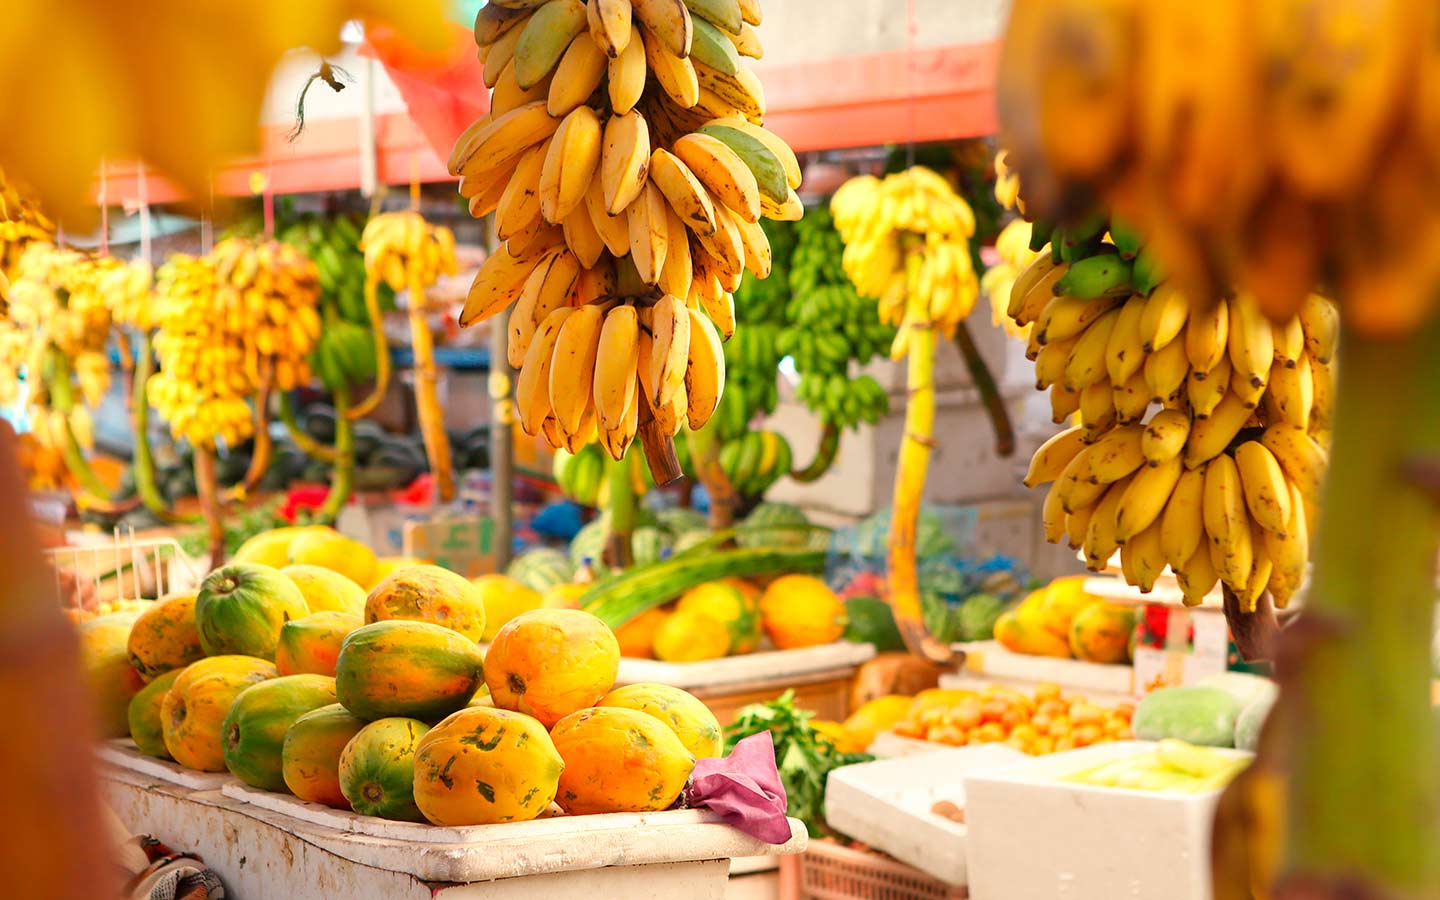 Palm Springs Certified Farmers' Market Pick: Exotic Fruits